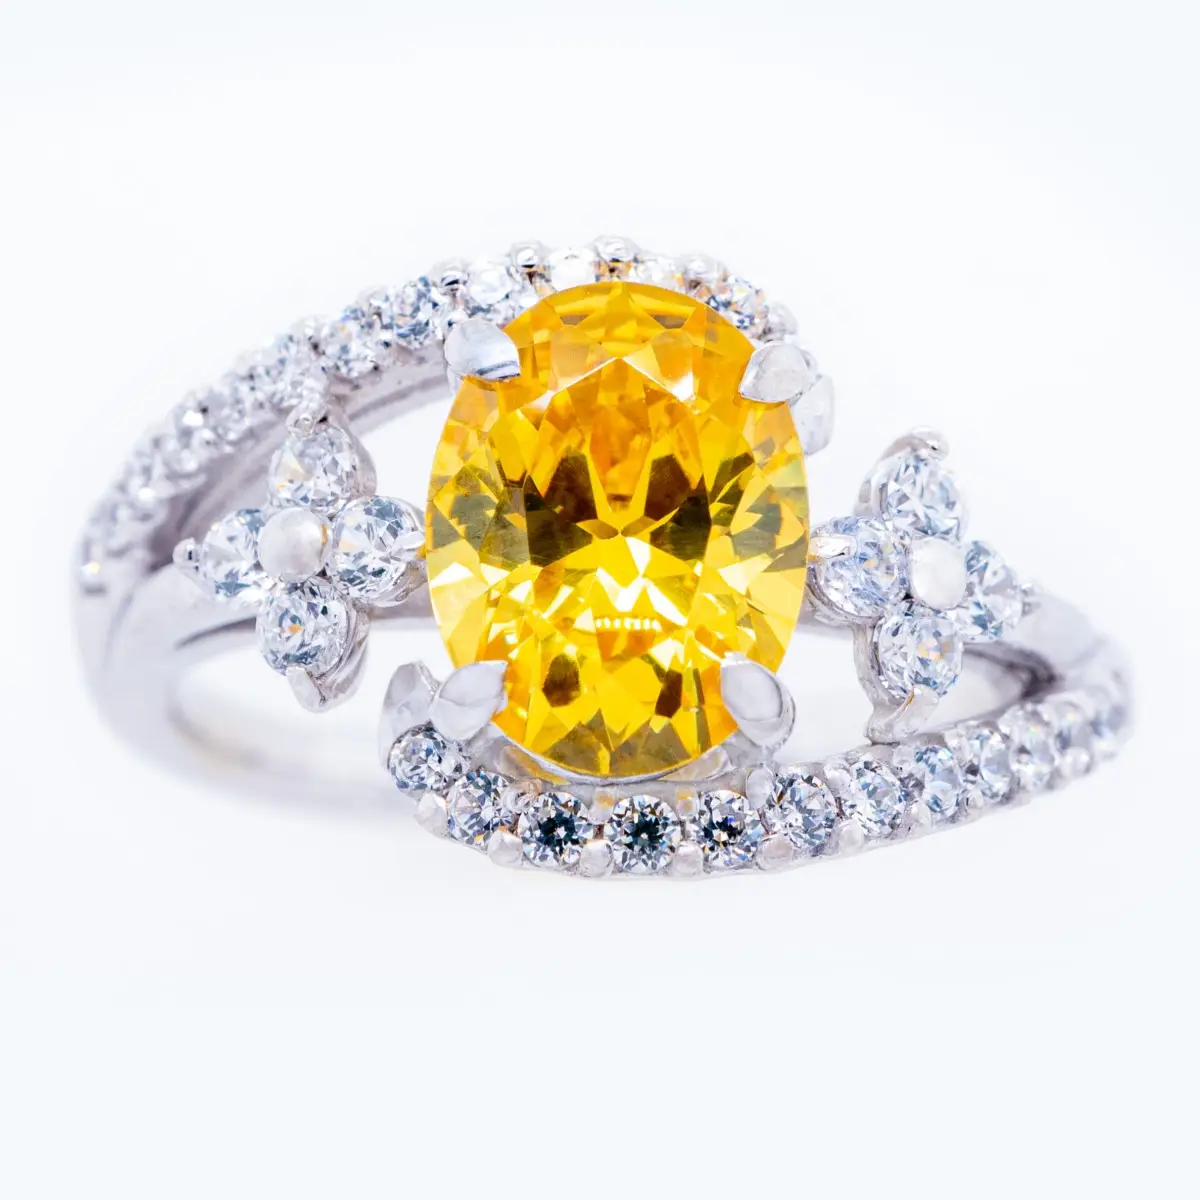 Shiny 925 Sterling Silver Gemstone Yellow Color Crystal Cubic Zirconia Engagement Rings Jewelry For Women Wholesale